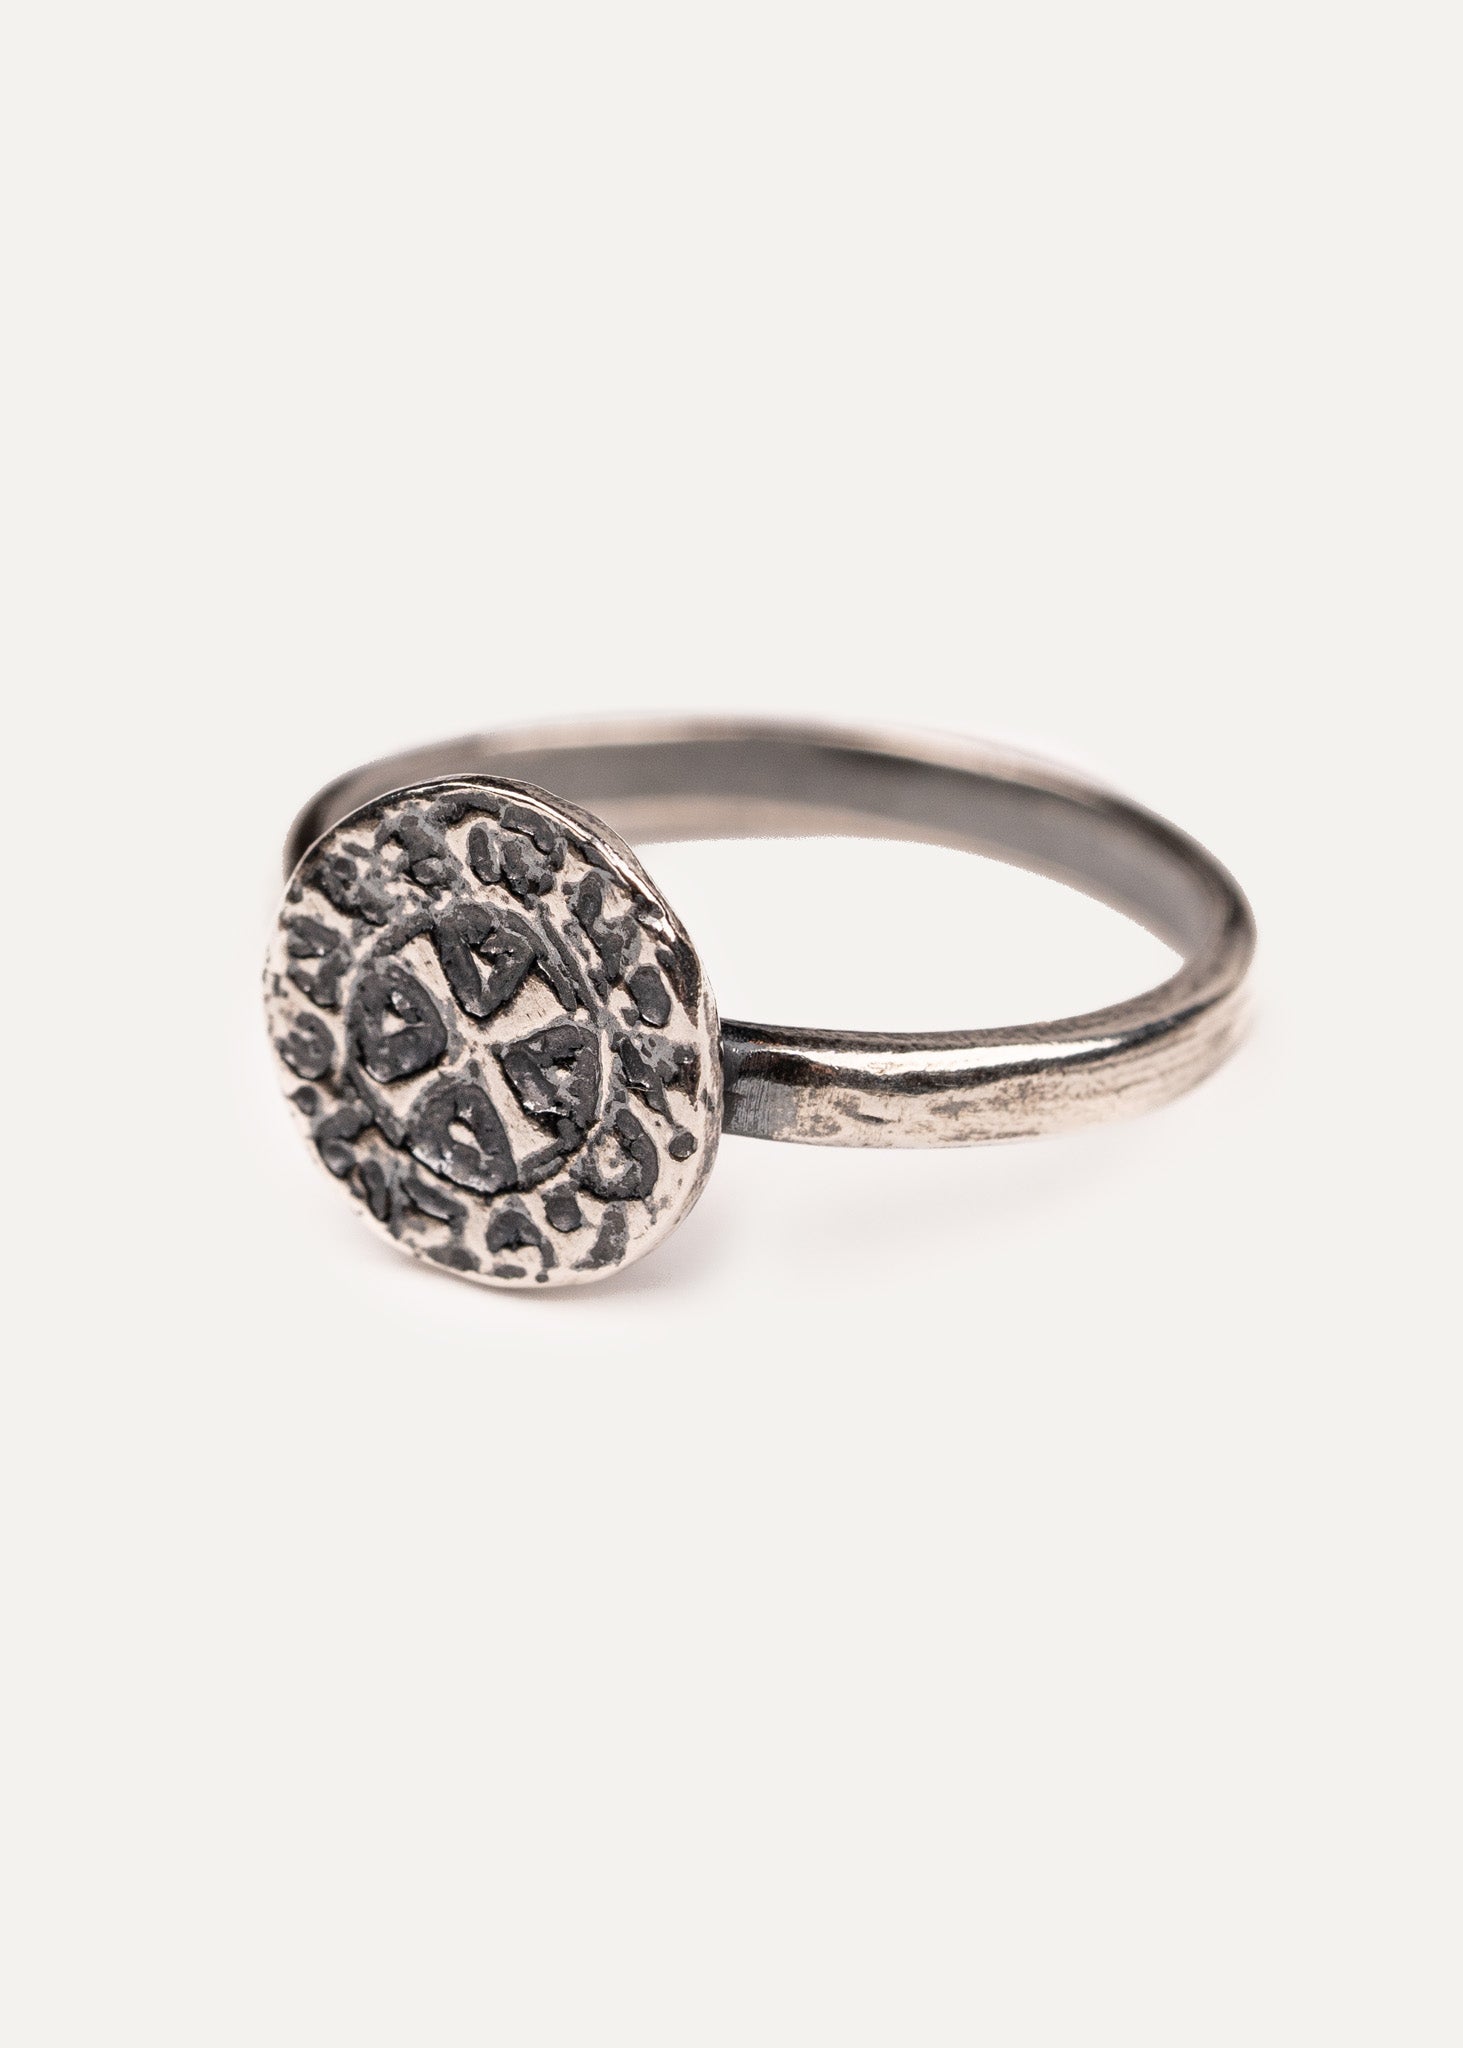 Quarter penny ring oxidized silver